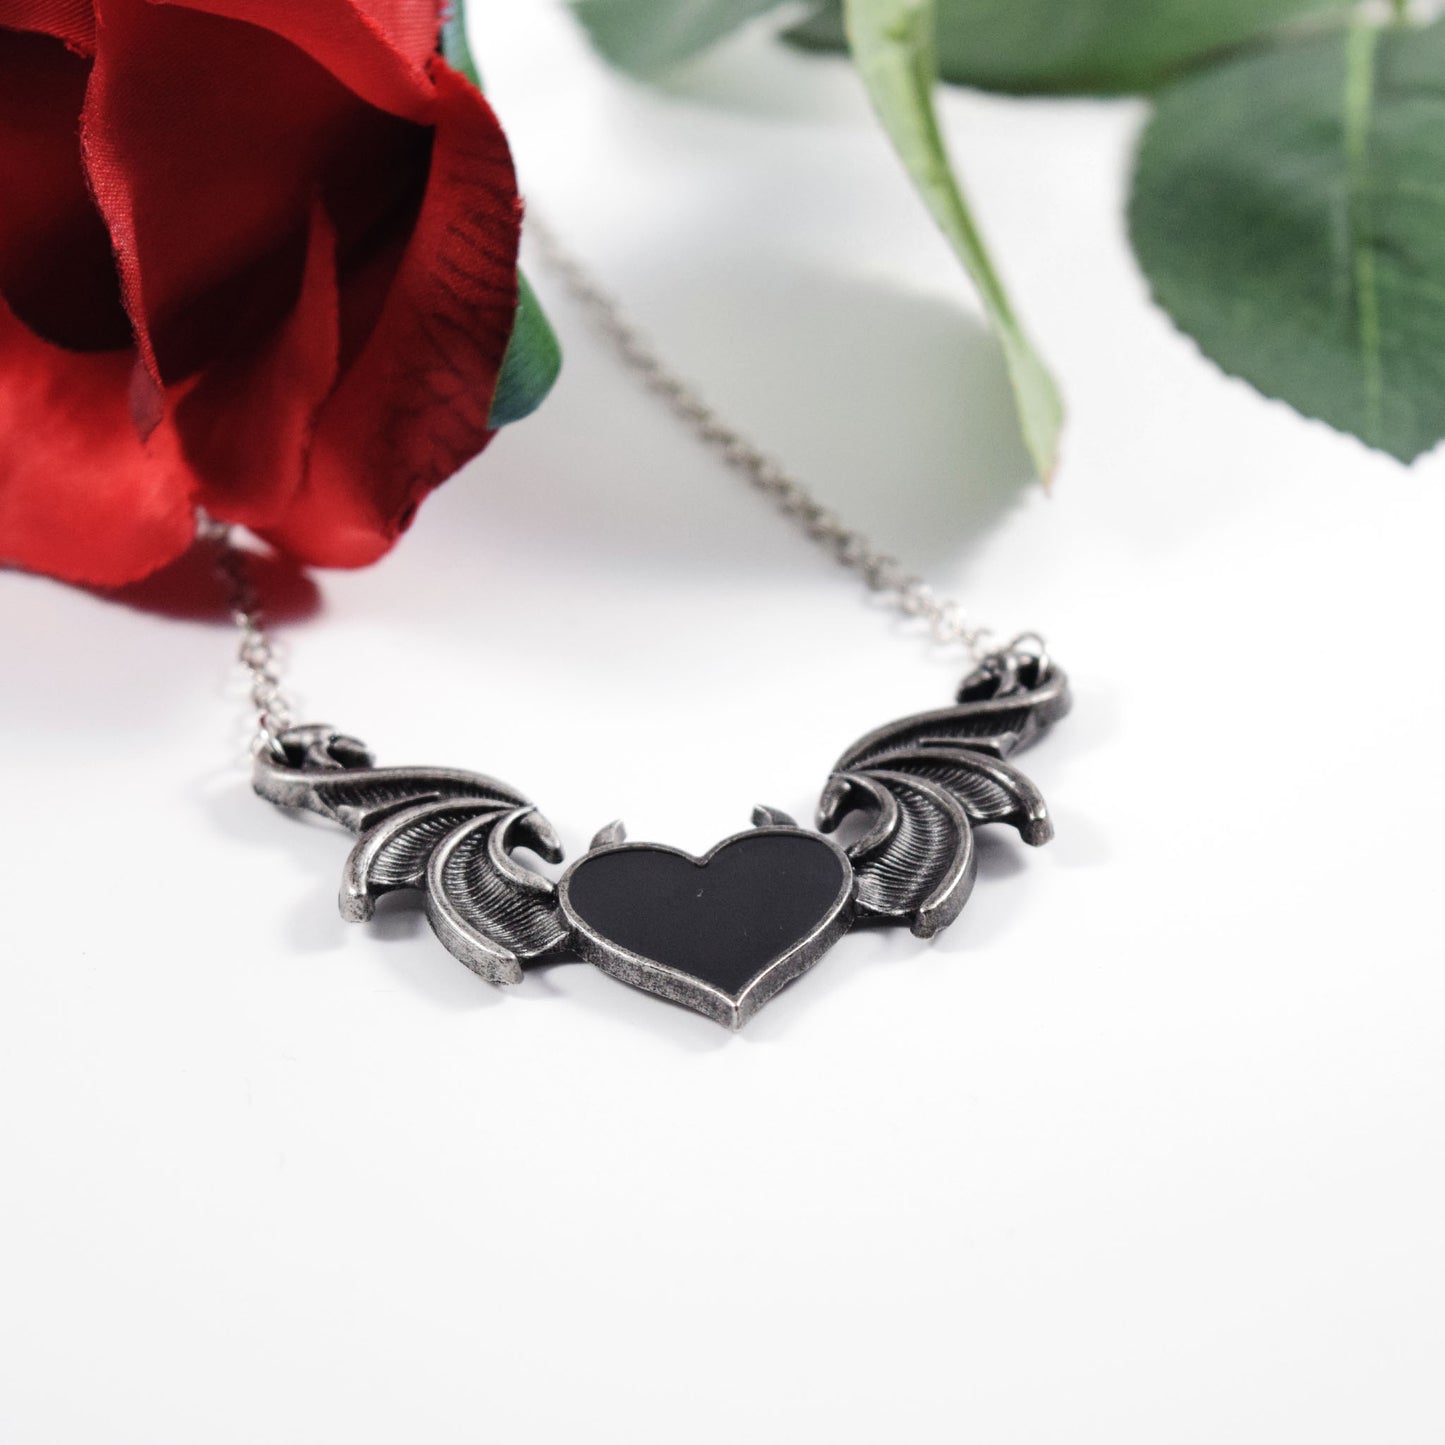 Charmed in black necklace